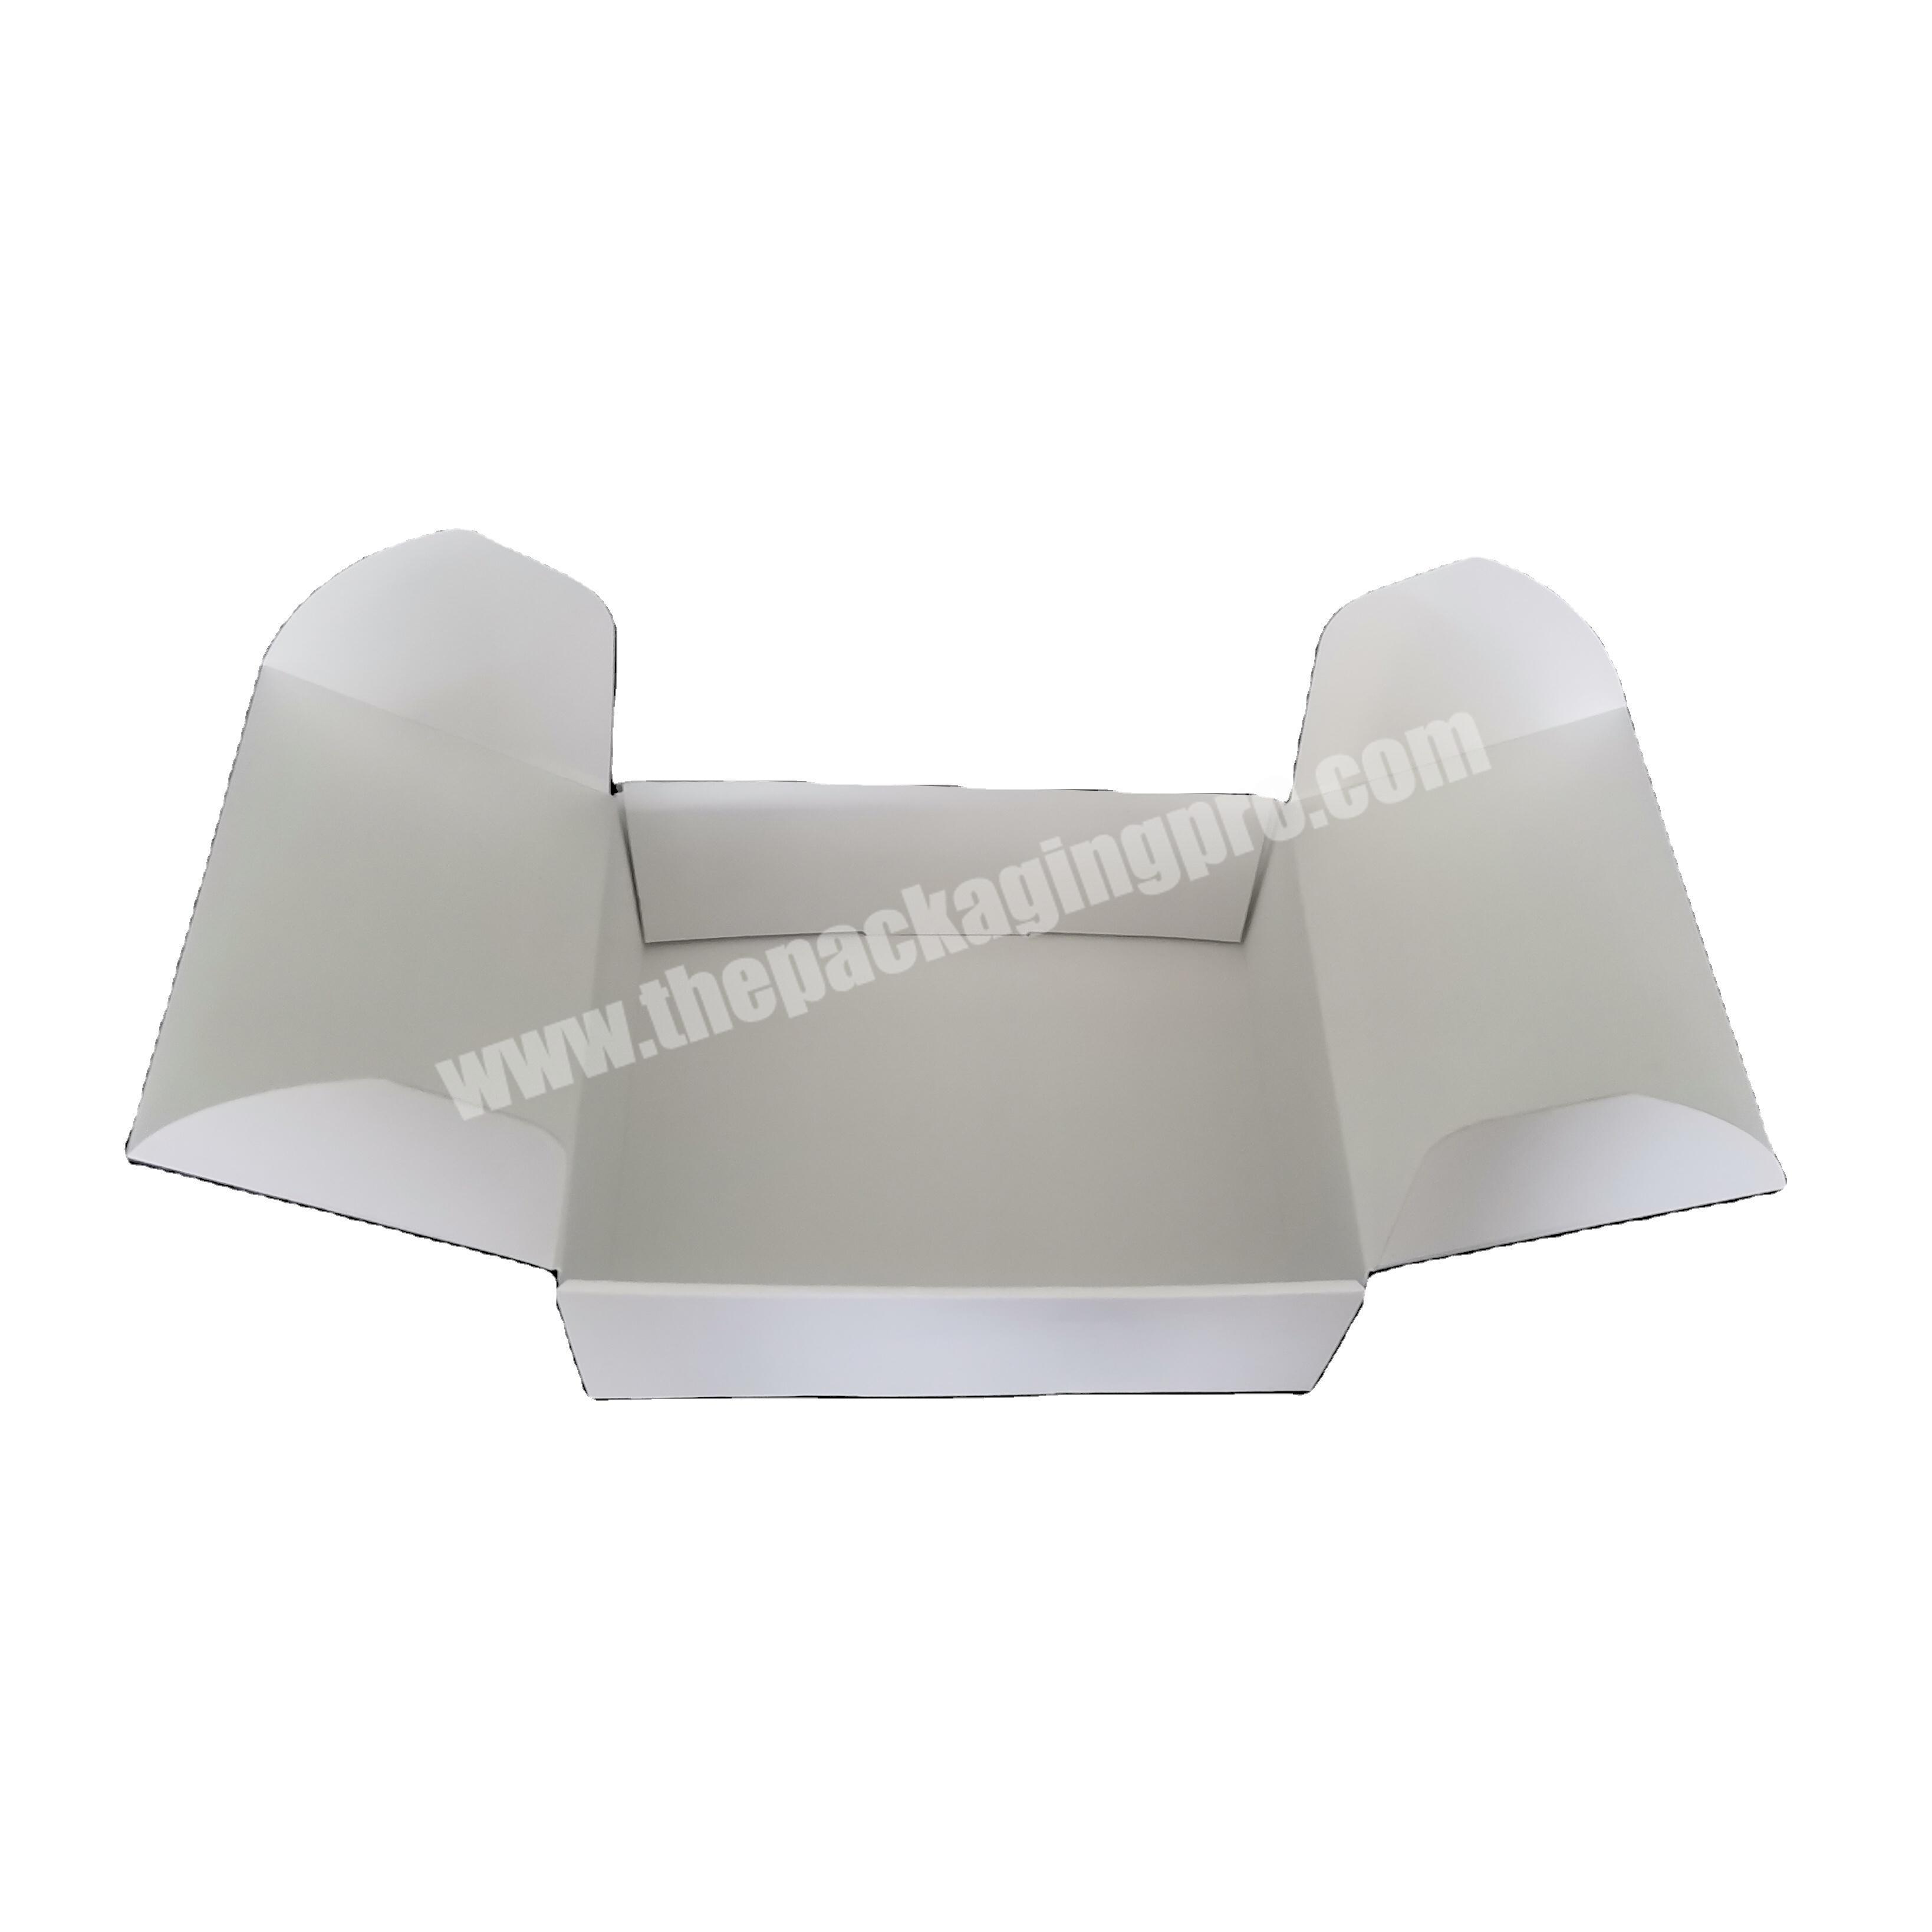 Recycled white paper box material single wall corrugated carton boxes for packing camera